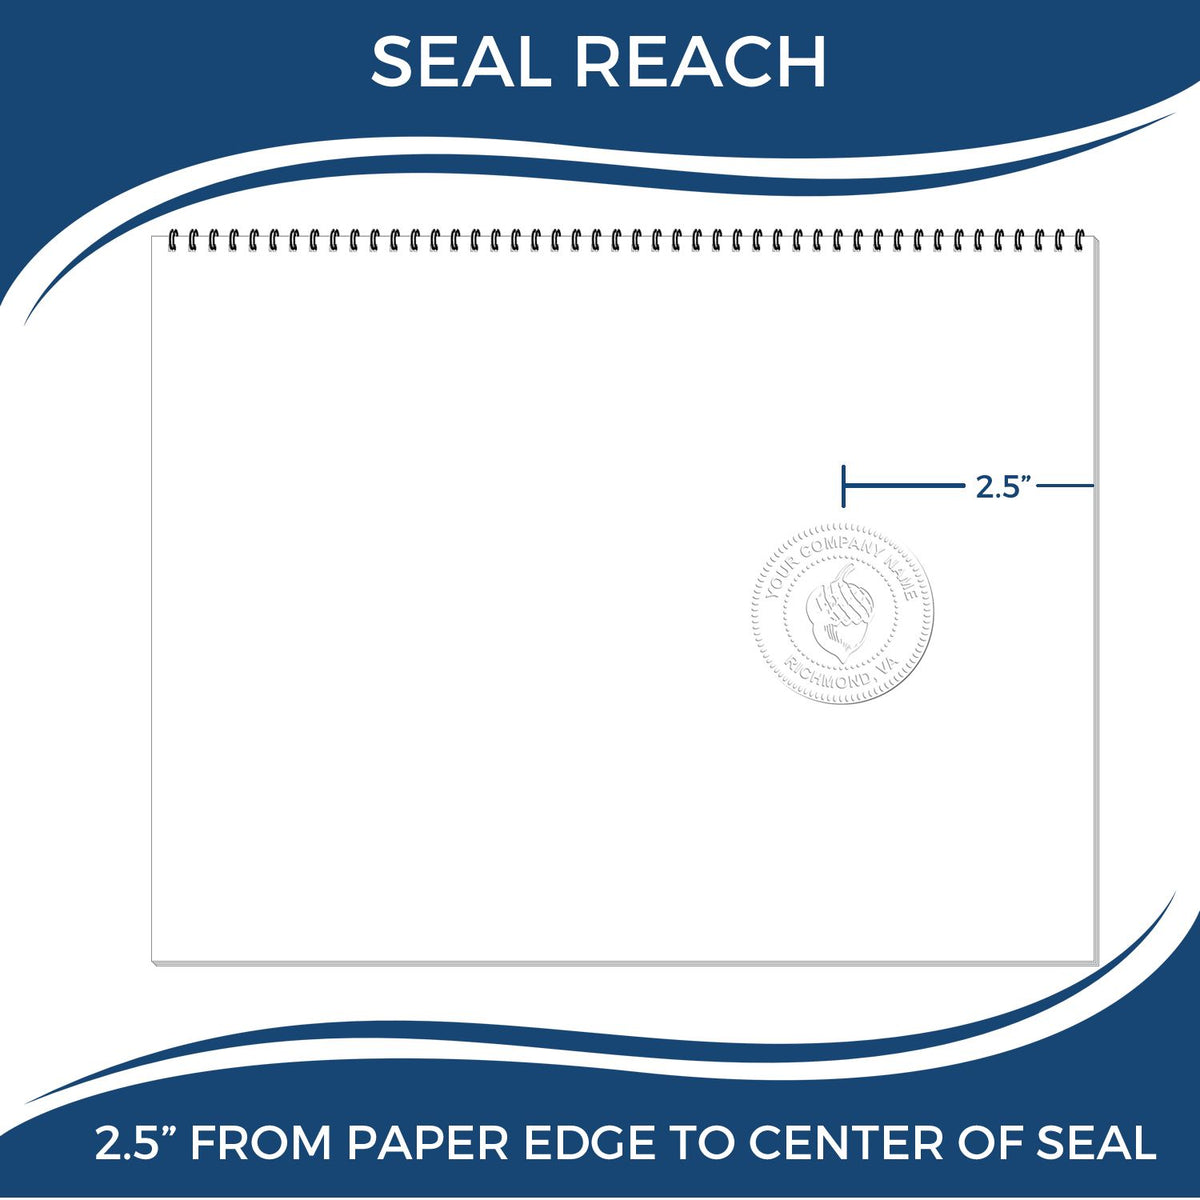 An infographic showing the seal reach which is represented by a ruler and a miniature seal image of the Long Reach Michigan Geology Seal